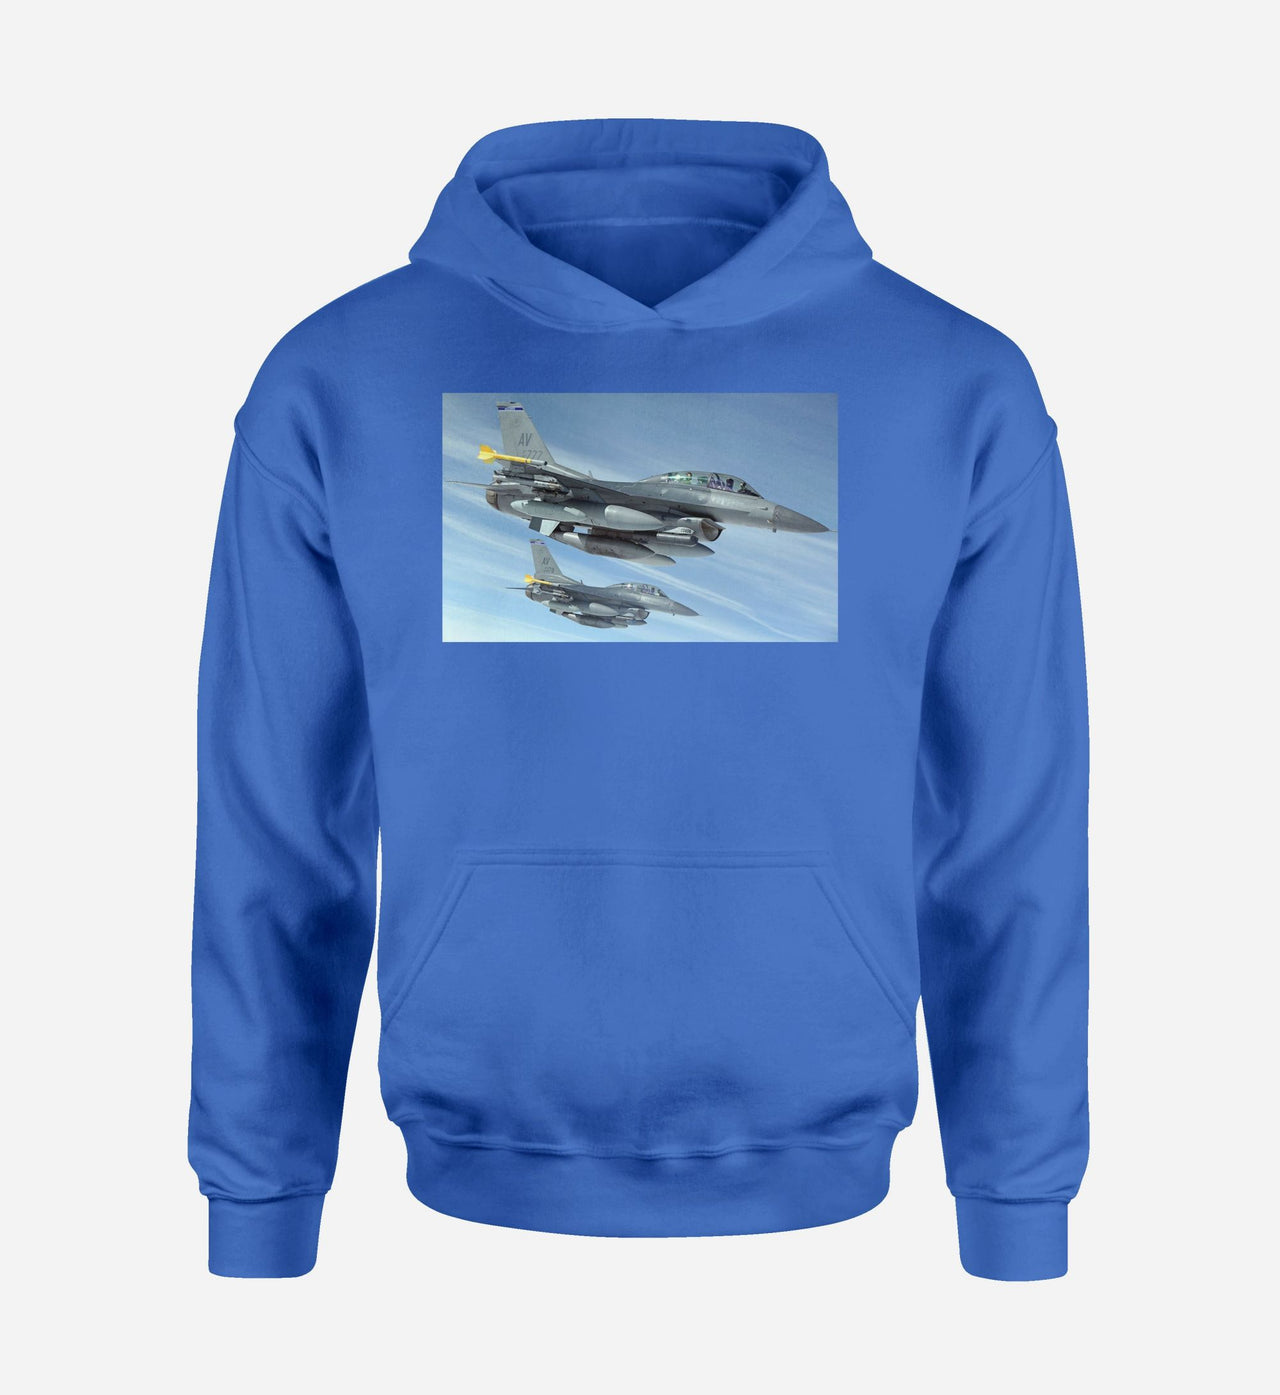 Two Fighting Falcon Designed Hoodies